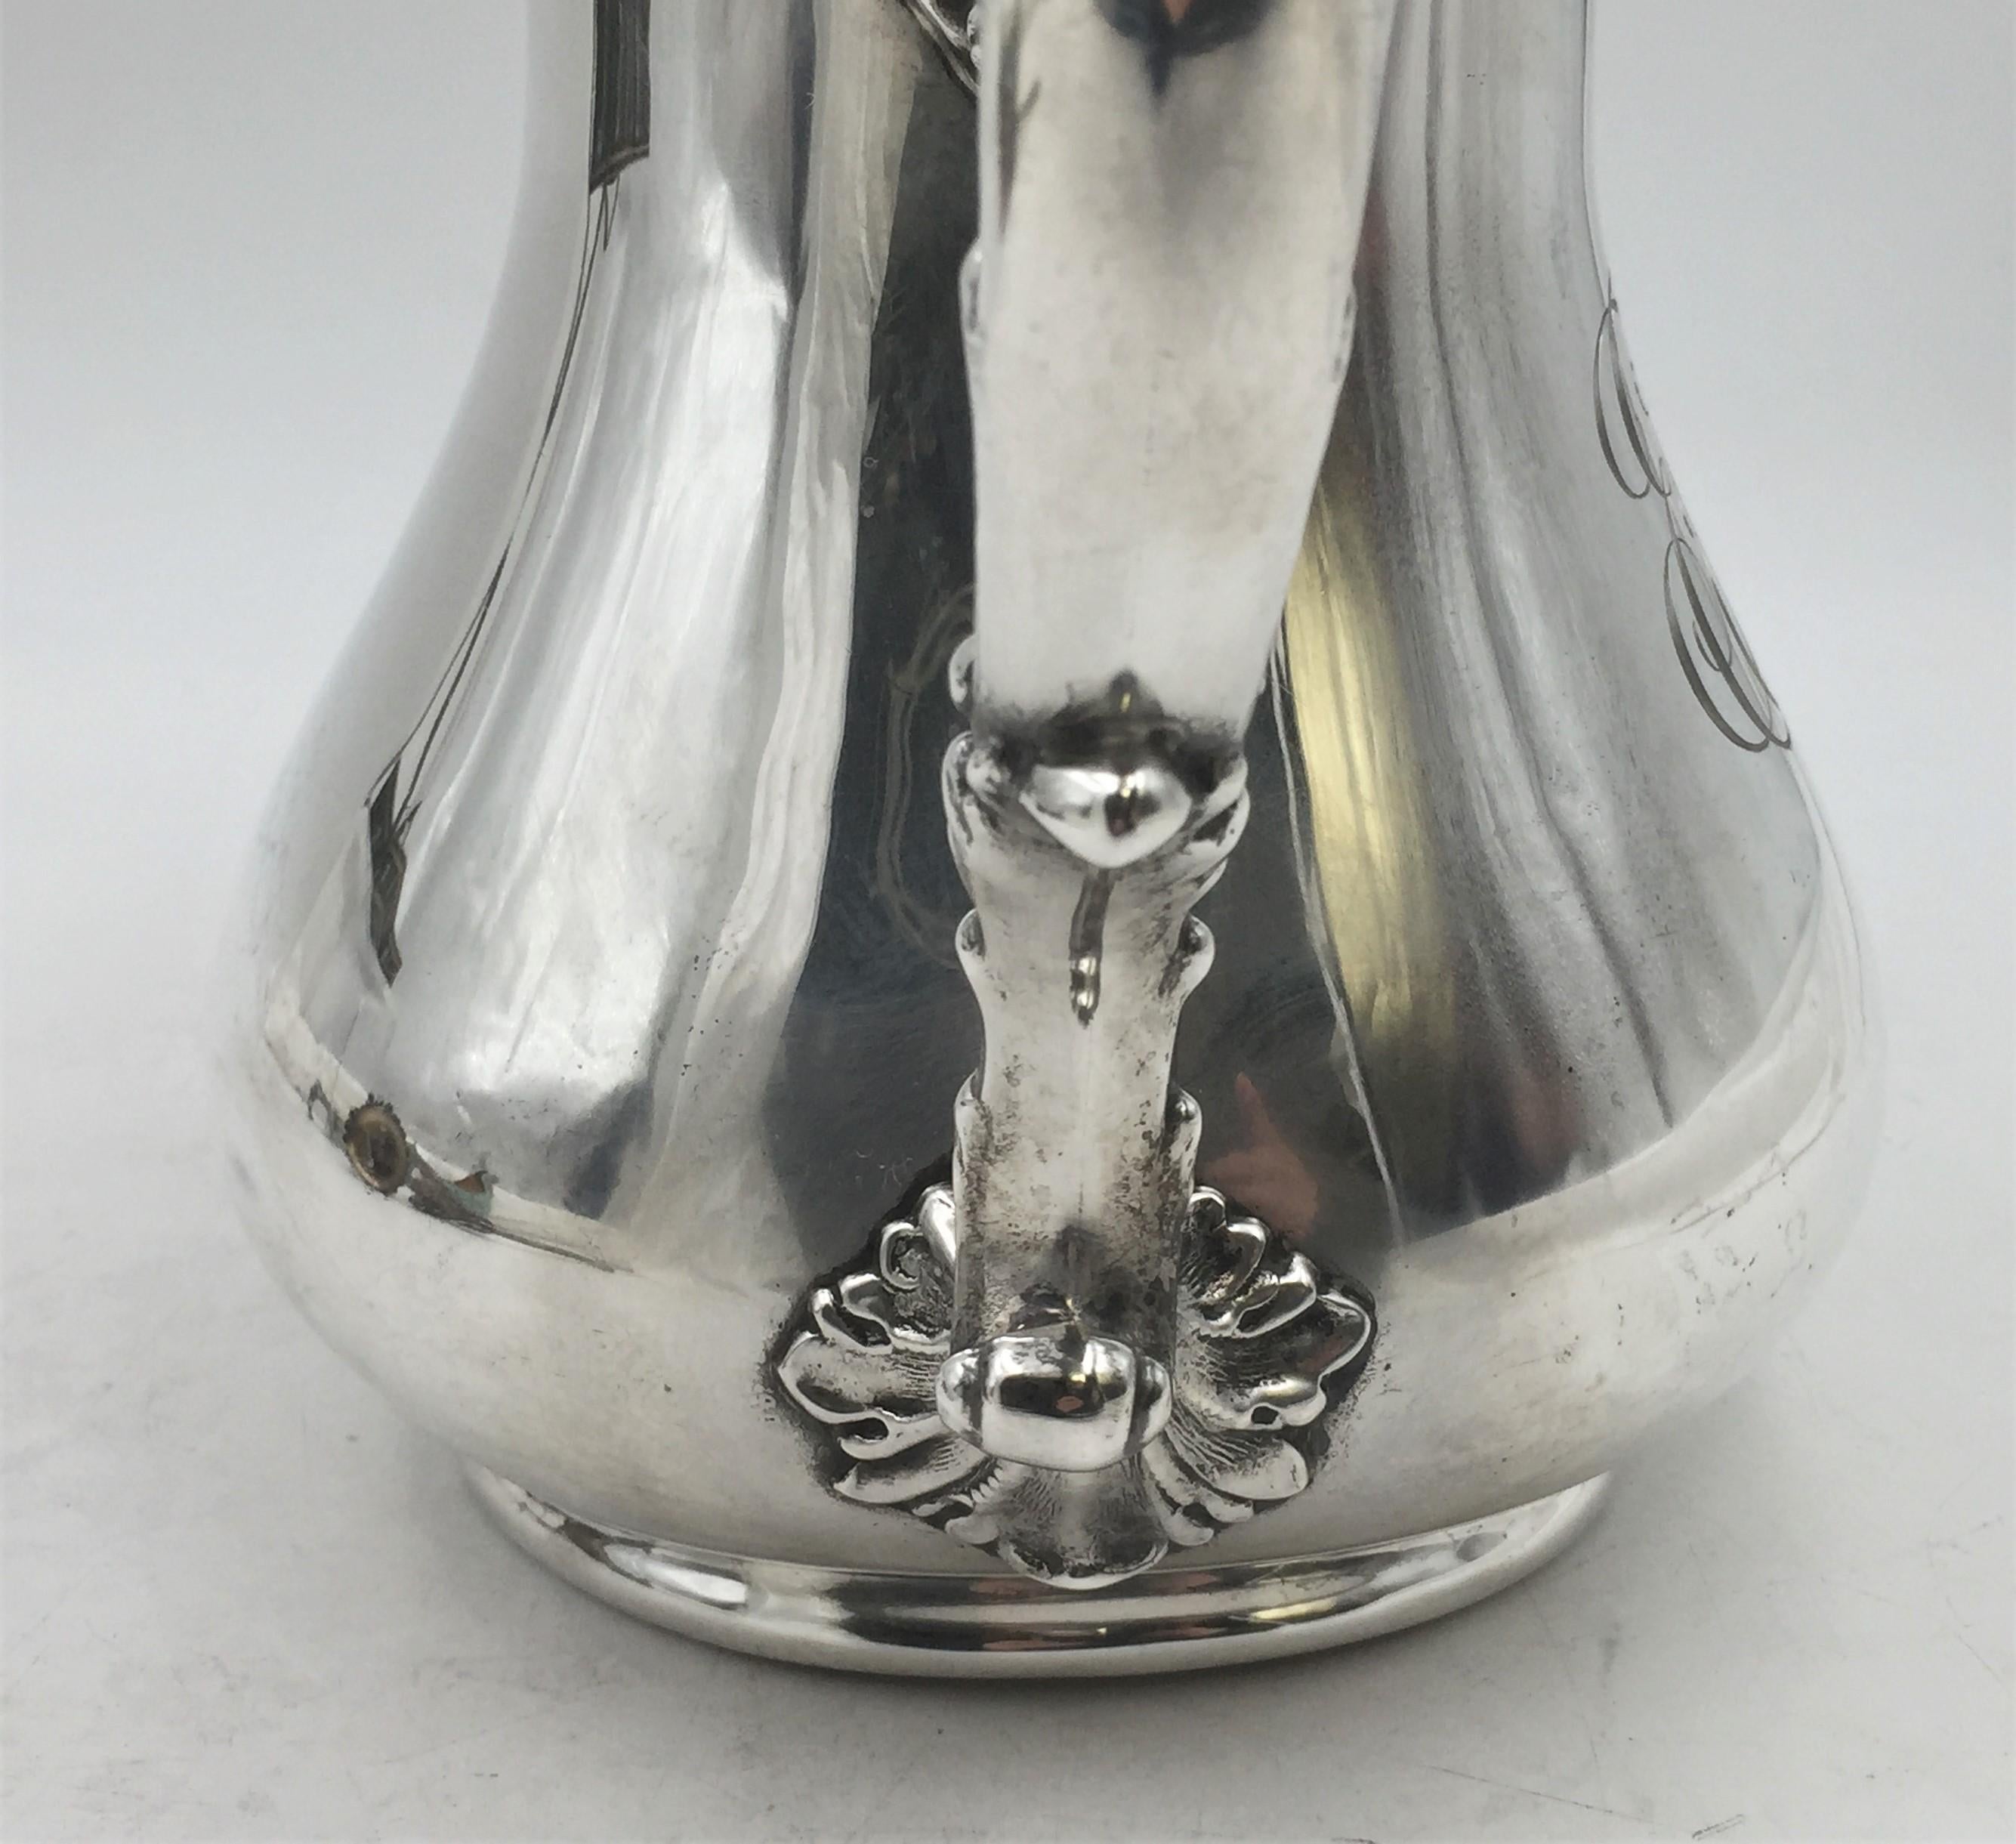 American Black, Starr & Frost Sterling Silver Pitcher Jug in Art Nouveau Style For Sale